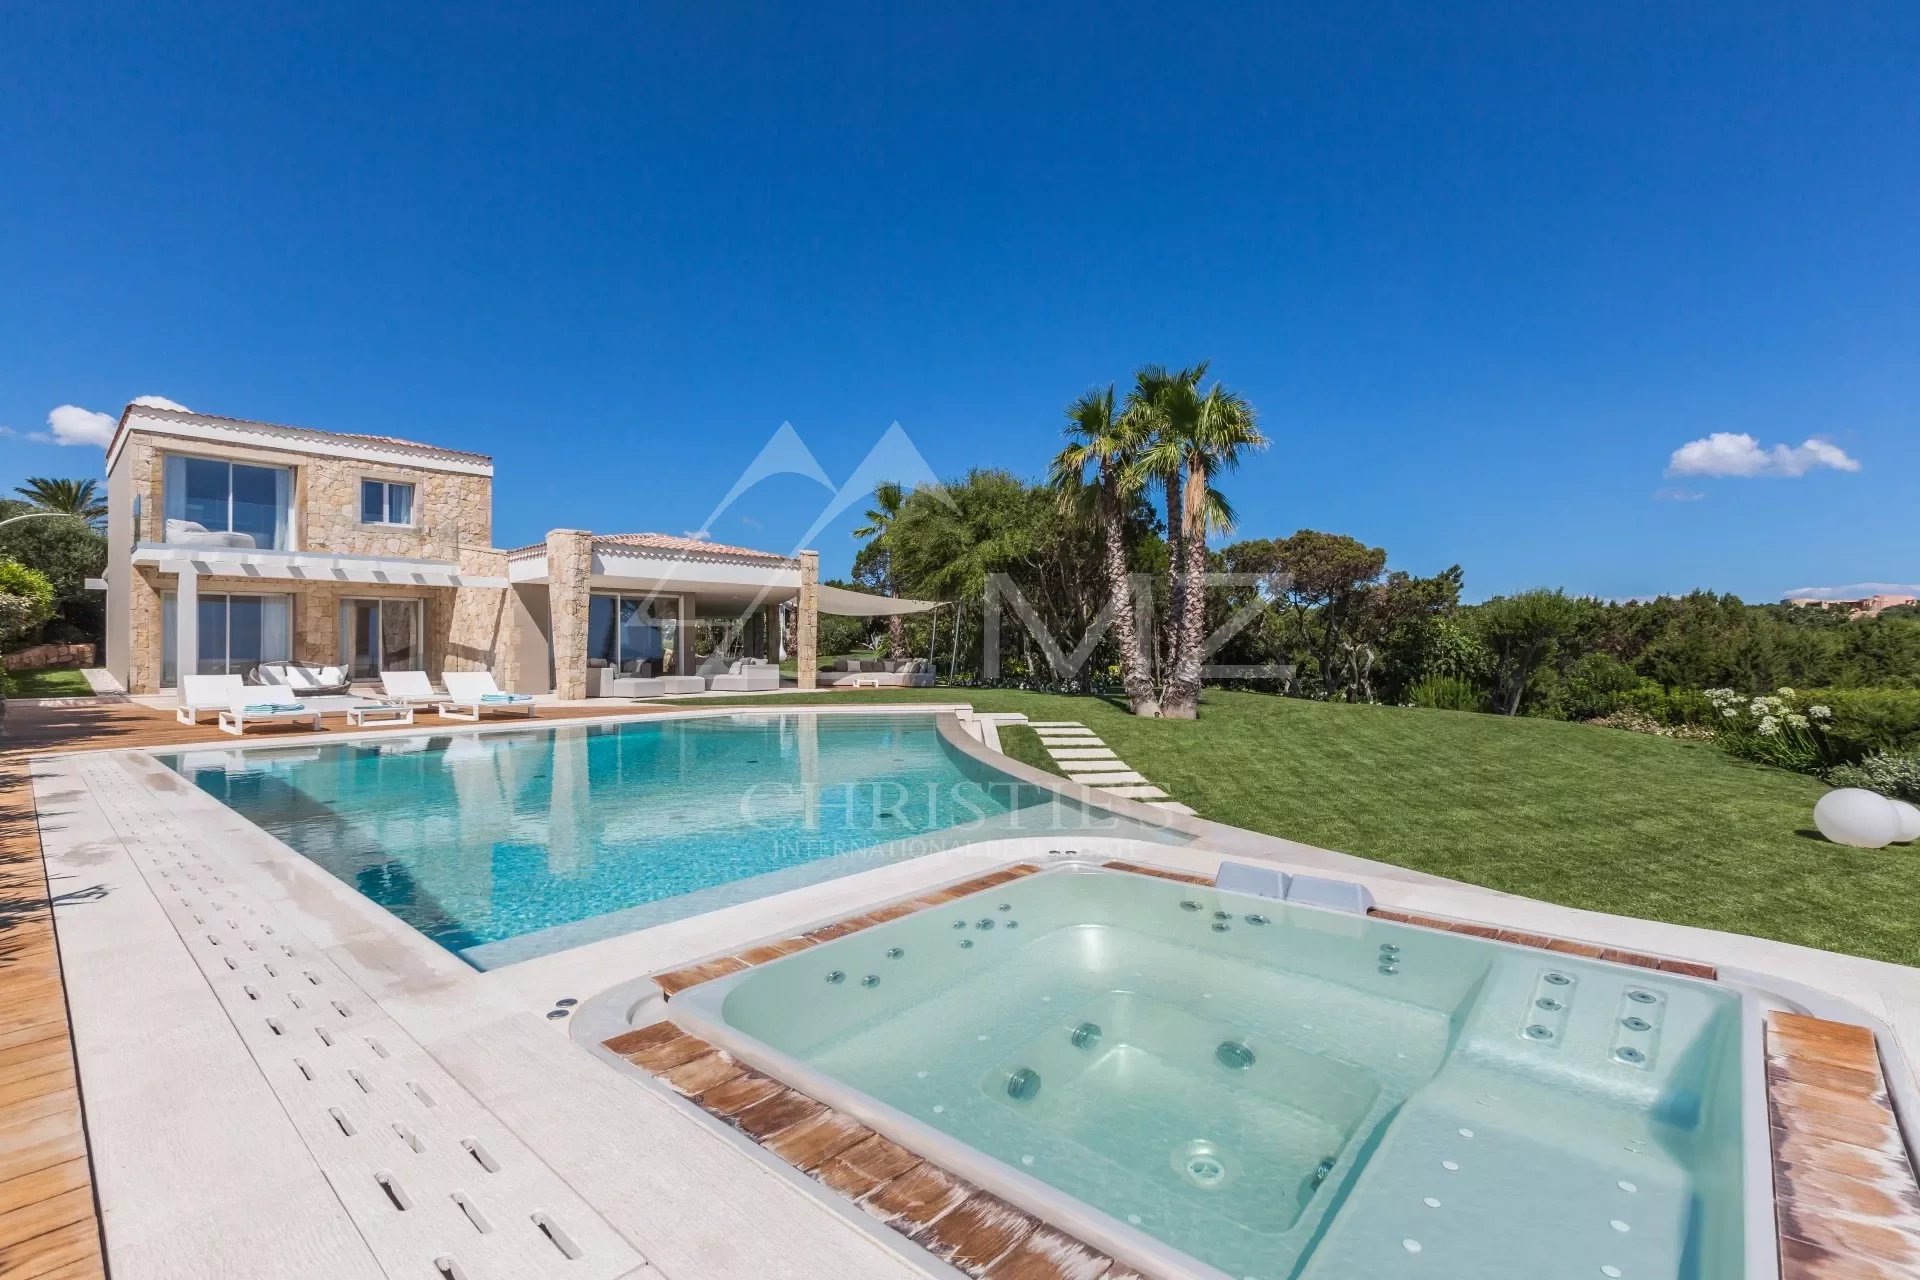 Italy - Porto Cervo - Exceptional waterfront property